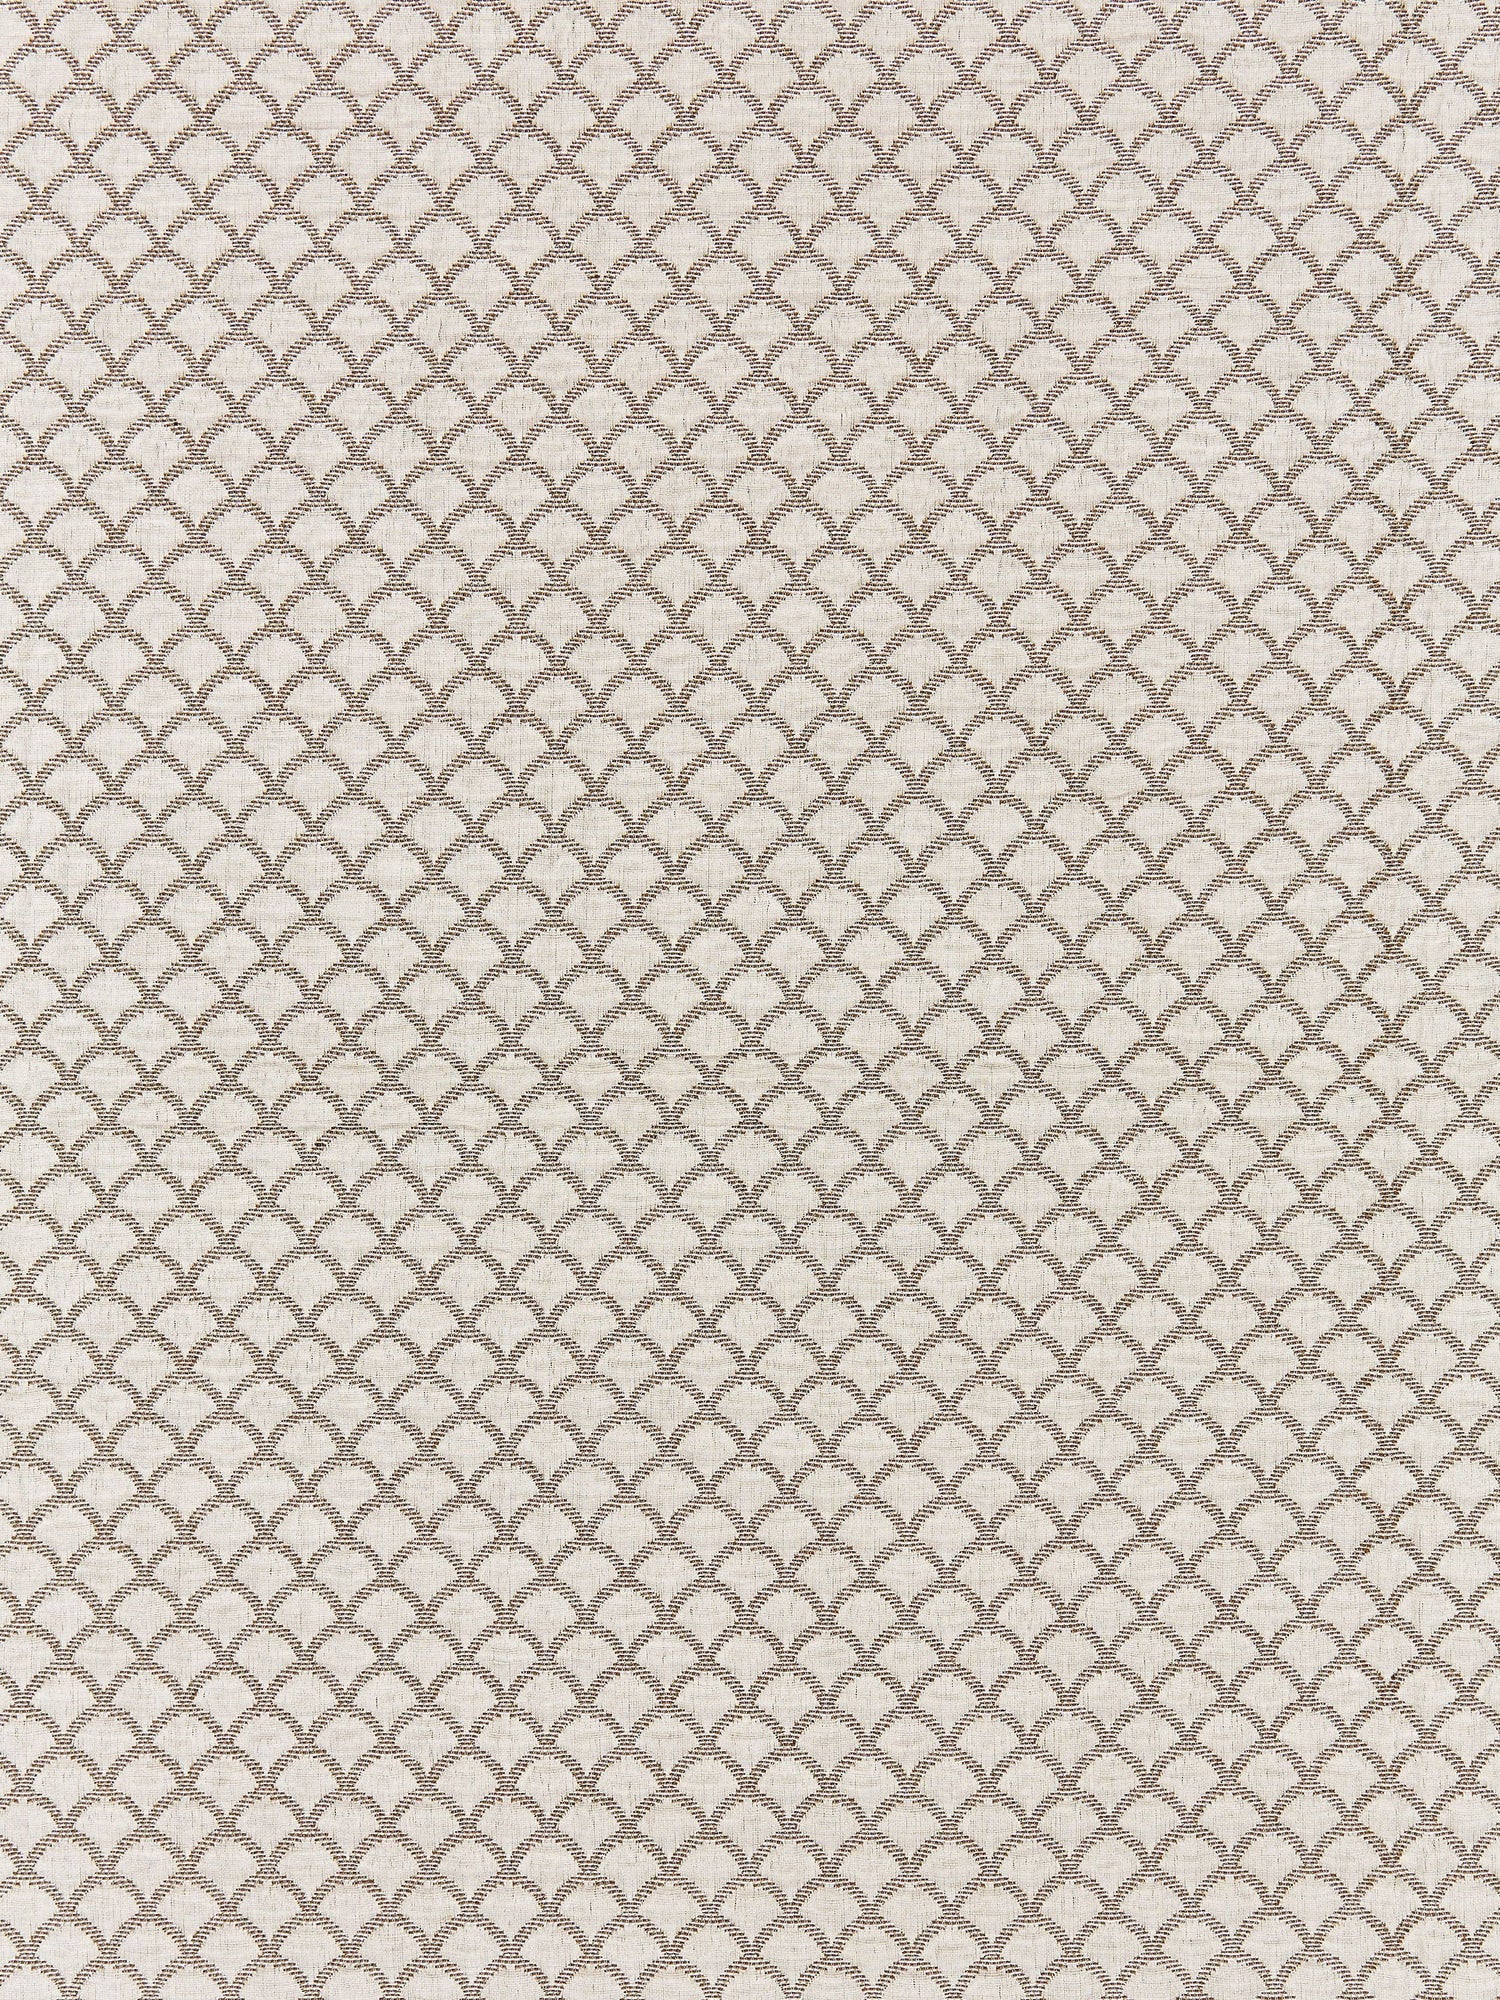 Scallop Weave fabric in flax color - pattern number SC 000327137 - by Scalamandre in the Scalamandre Fabrics Book 1 collection